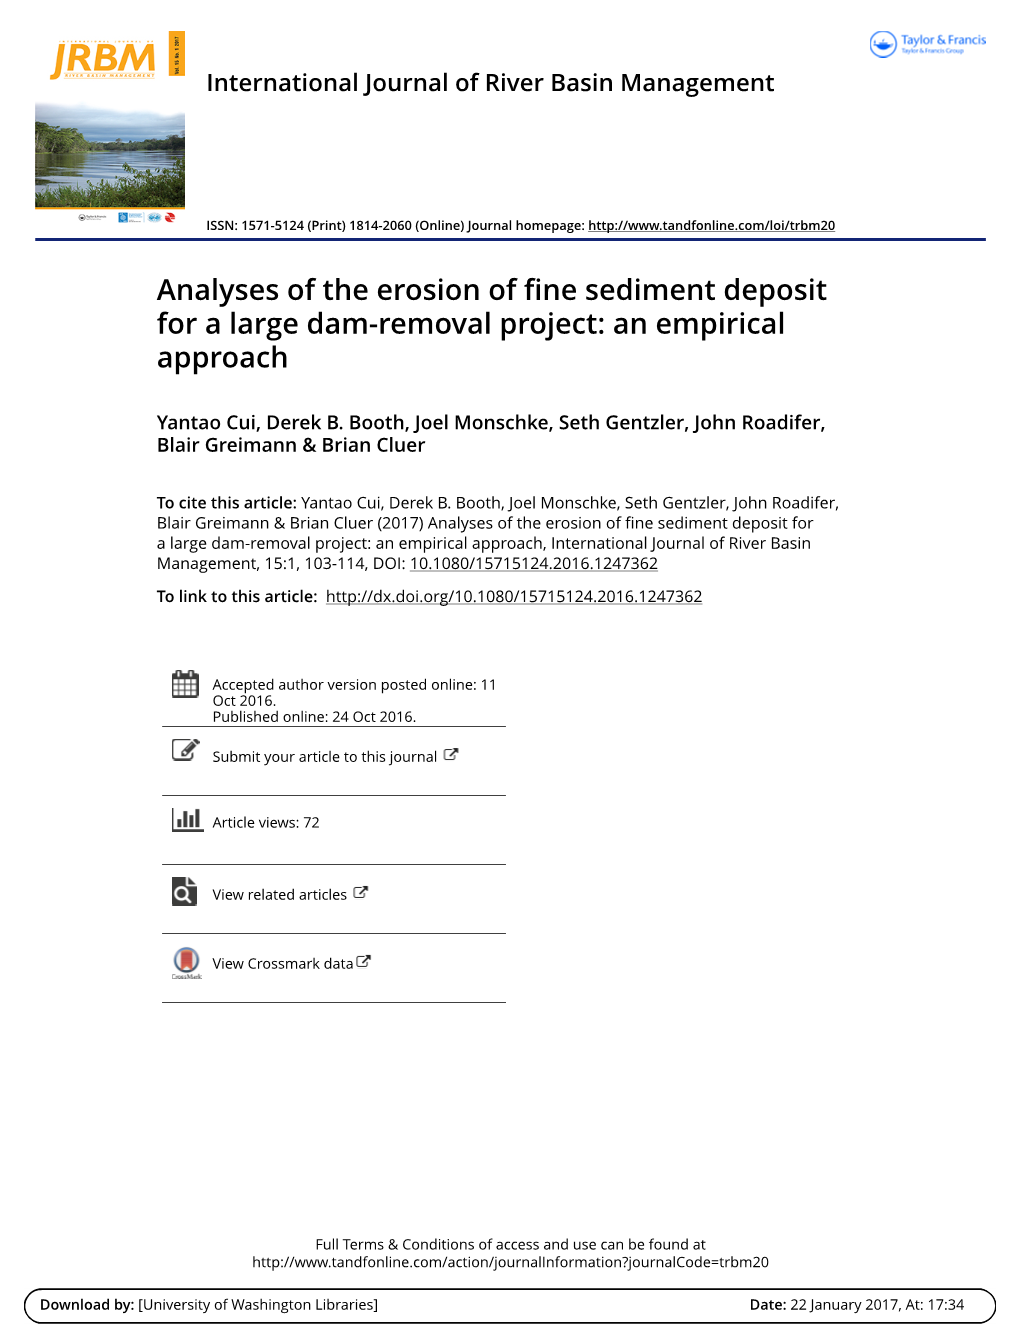 Analyses of the Erosion of Fine Sediment Deposit for a Large Dam-Removal Project: an Empirical Approach